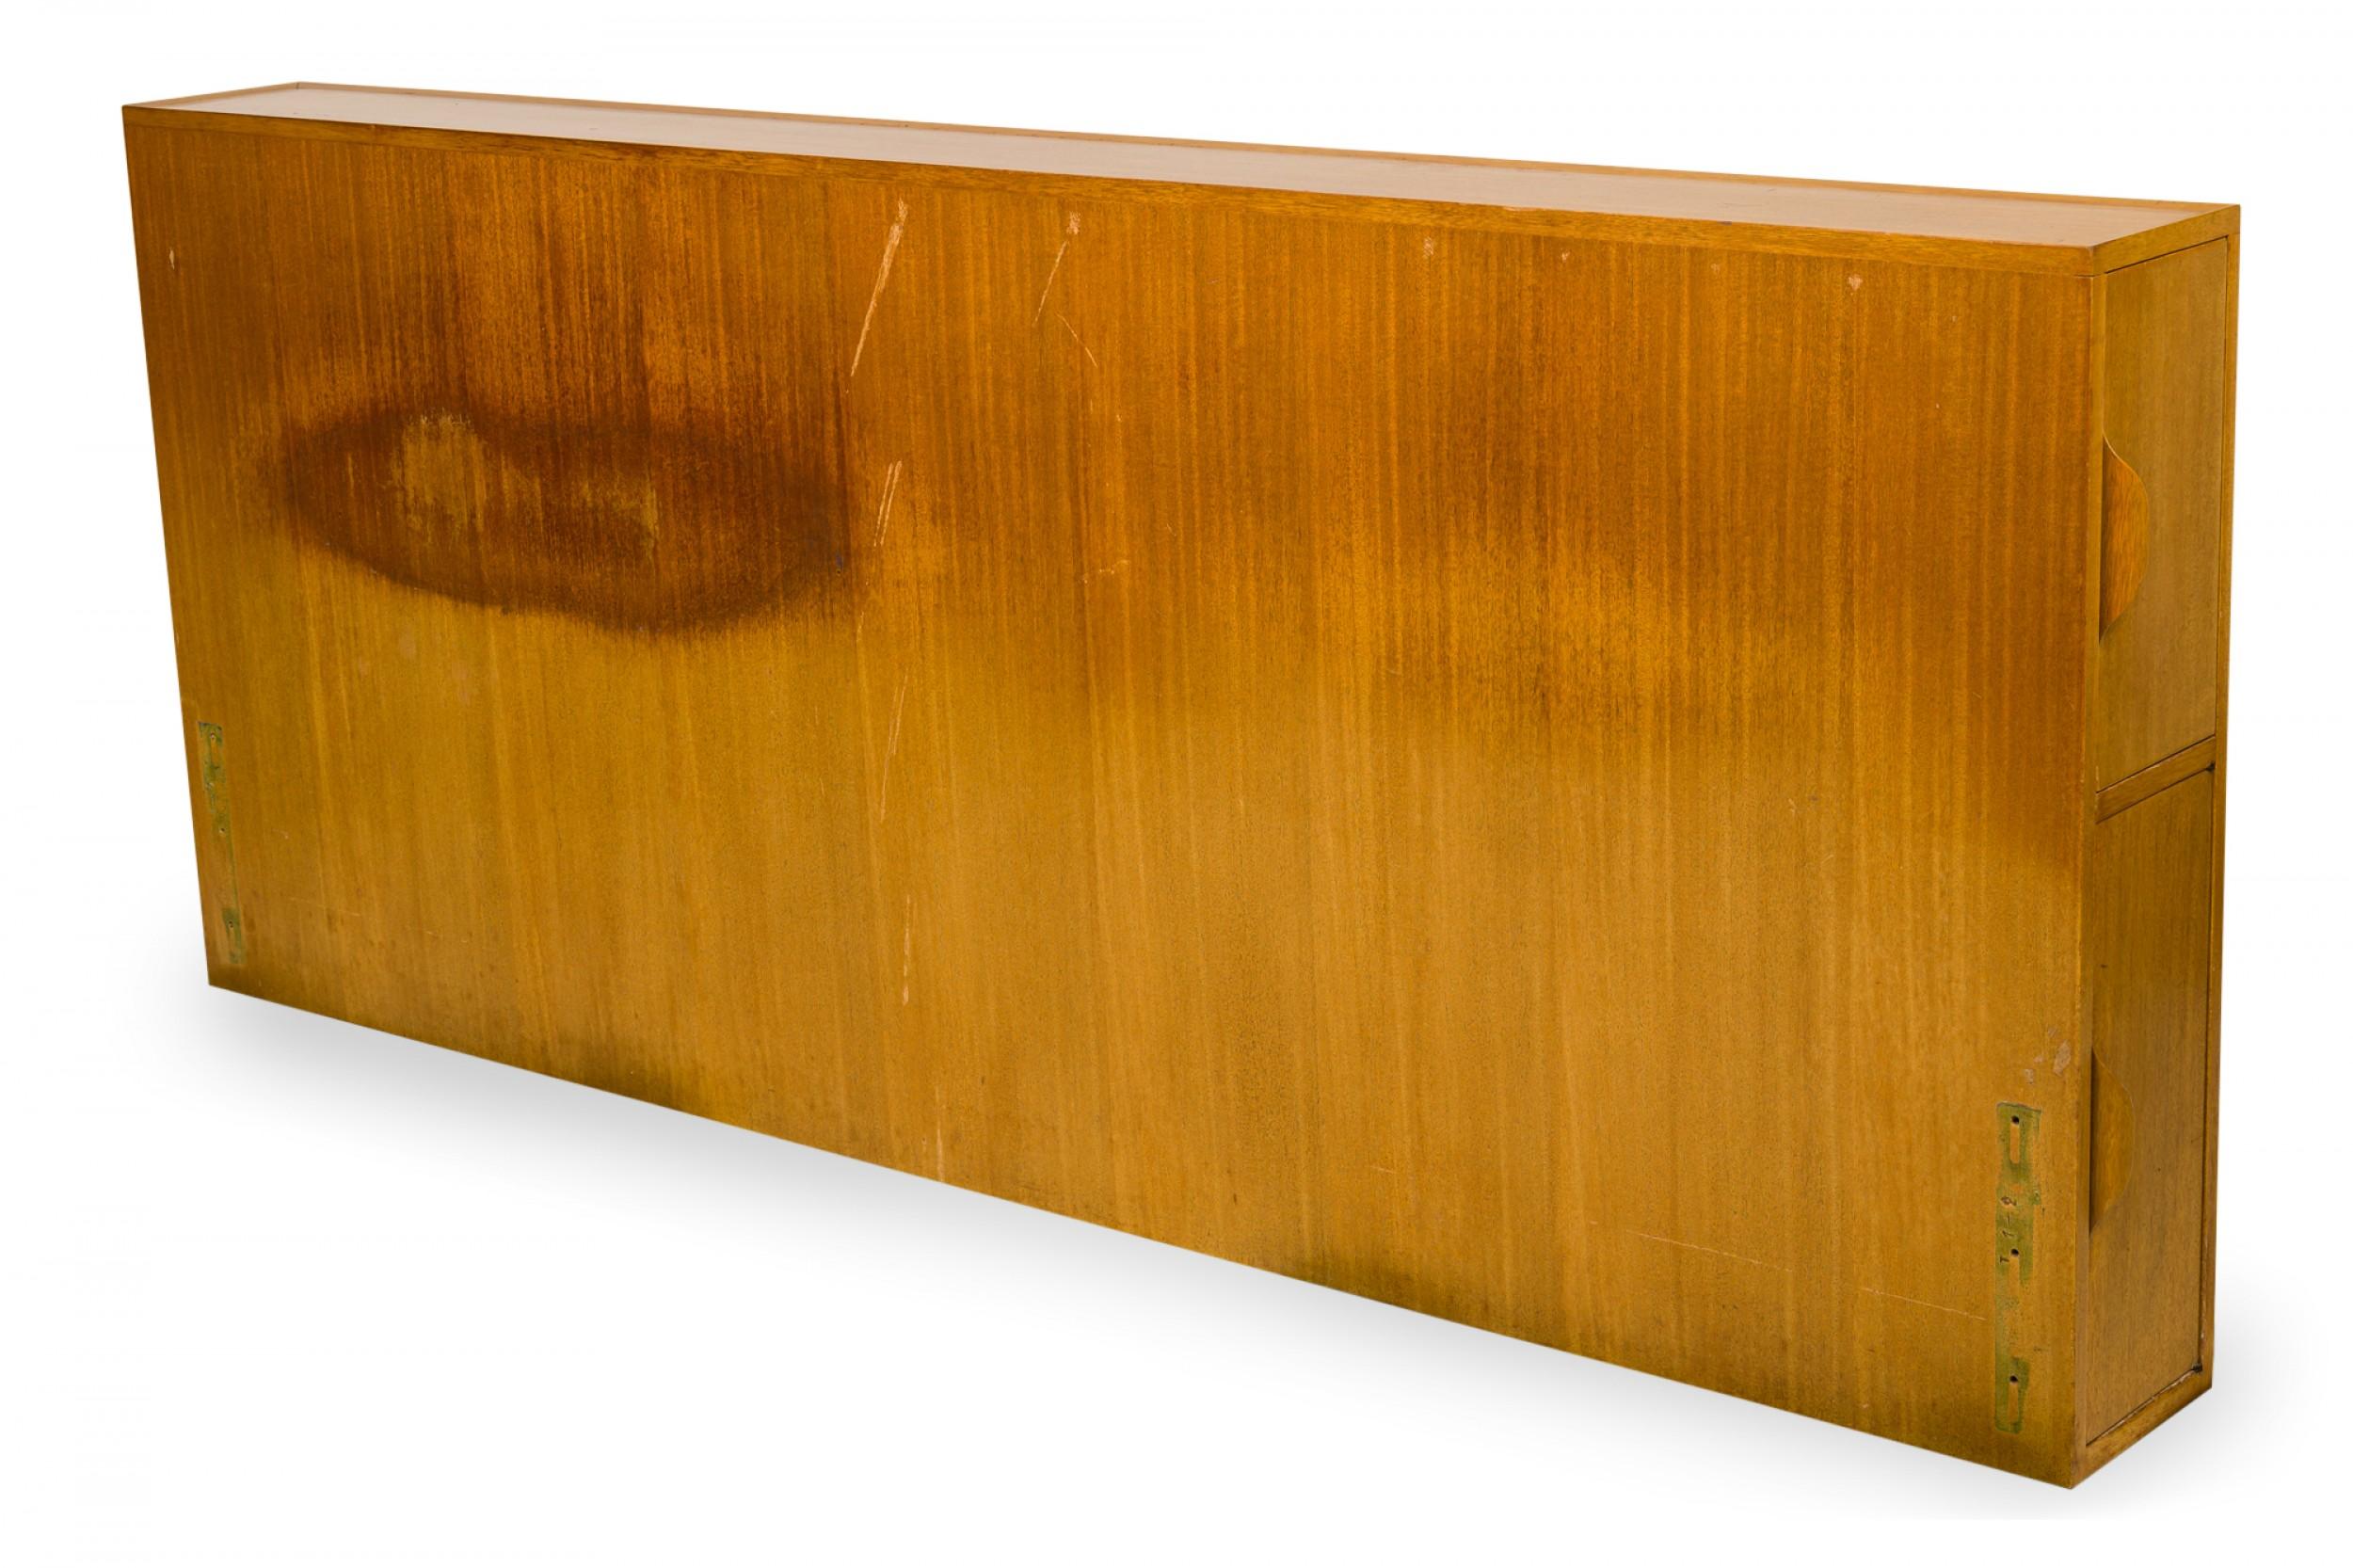 American Mid-Century wooden queen size storage headboard with two vertical drawers on either side with bentwood handles that open to reveal a lower open compartment and an upper compartment with a pivoting hinged interior shelf. (EDWARD WORMLEY FOR